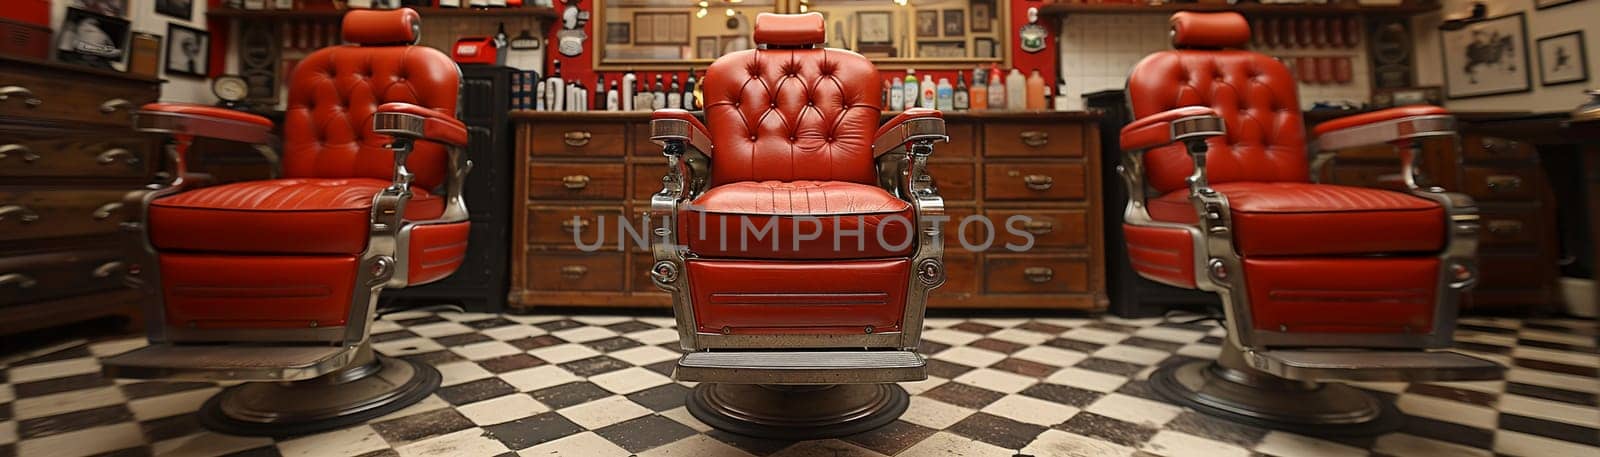 Classic Barbershop Revives Timeless Style in Business of Traditional Men's Grooming, Barber chairs and hot towels revive a story of timeless style and traditional men's grooming in the classic barbershop business.